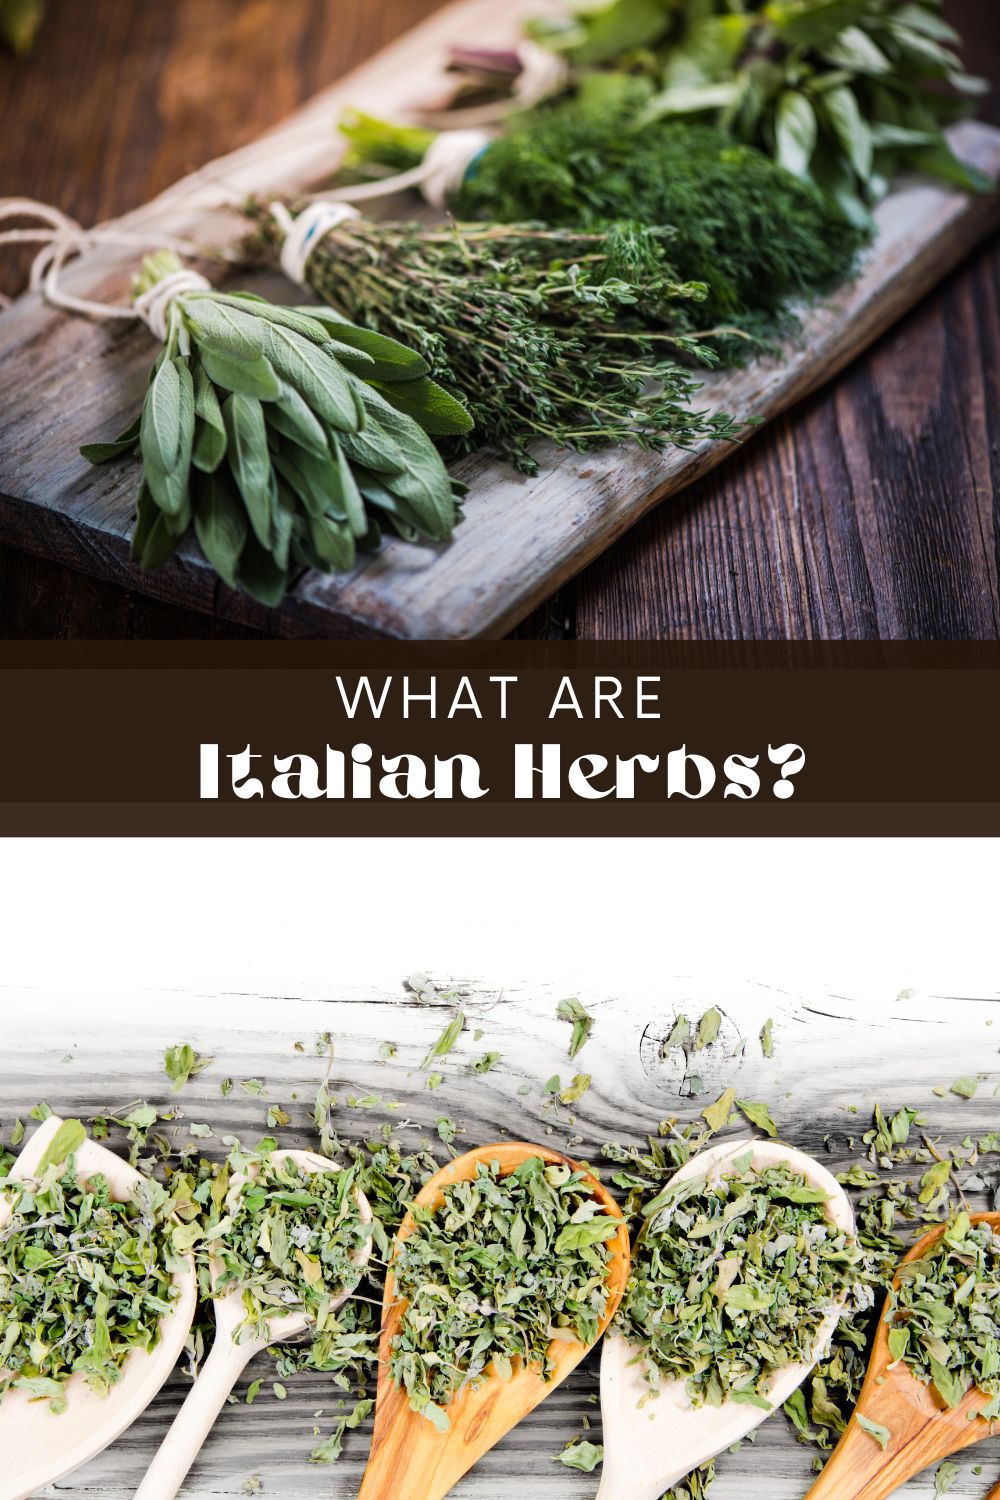 Full of aromatic natural goodness, Italian herbs offer a unique and delicious flavor to any dish. But while many of us have this wonderful seasoning mix on our spice rack, what exactly do Italian herbs consist of?